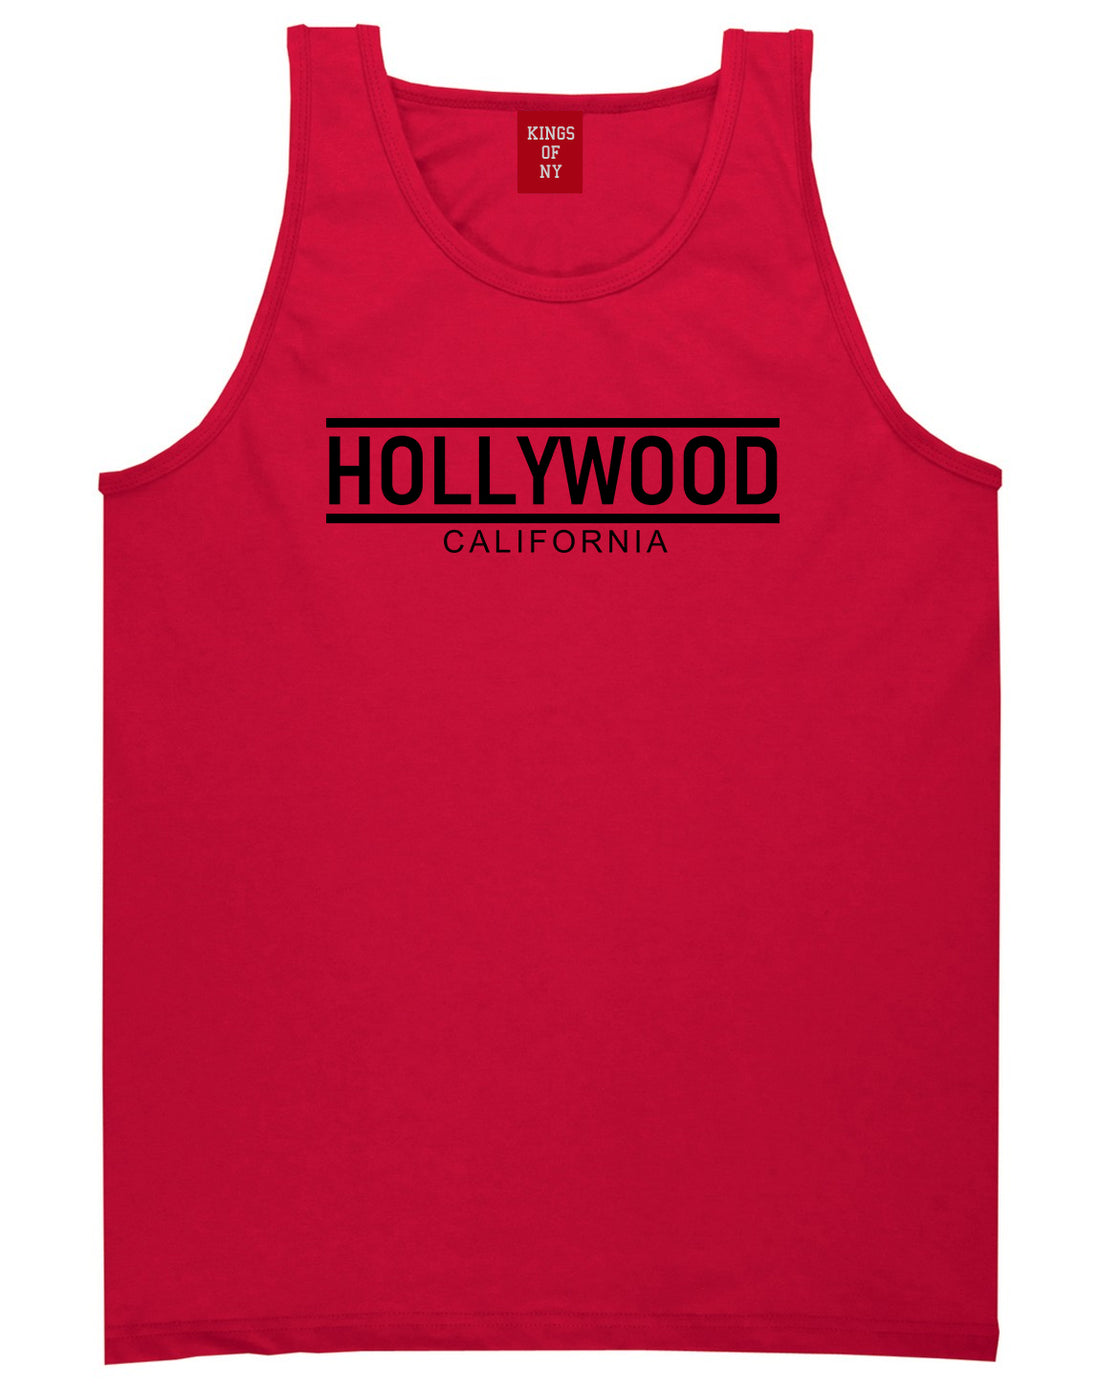 Hollywood California City Lines Mens Tank Top T-Shirt Red